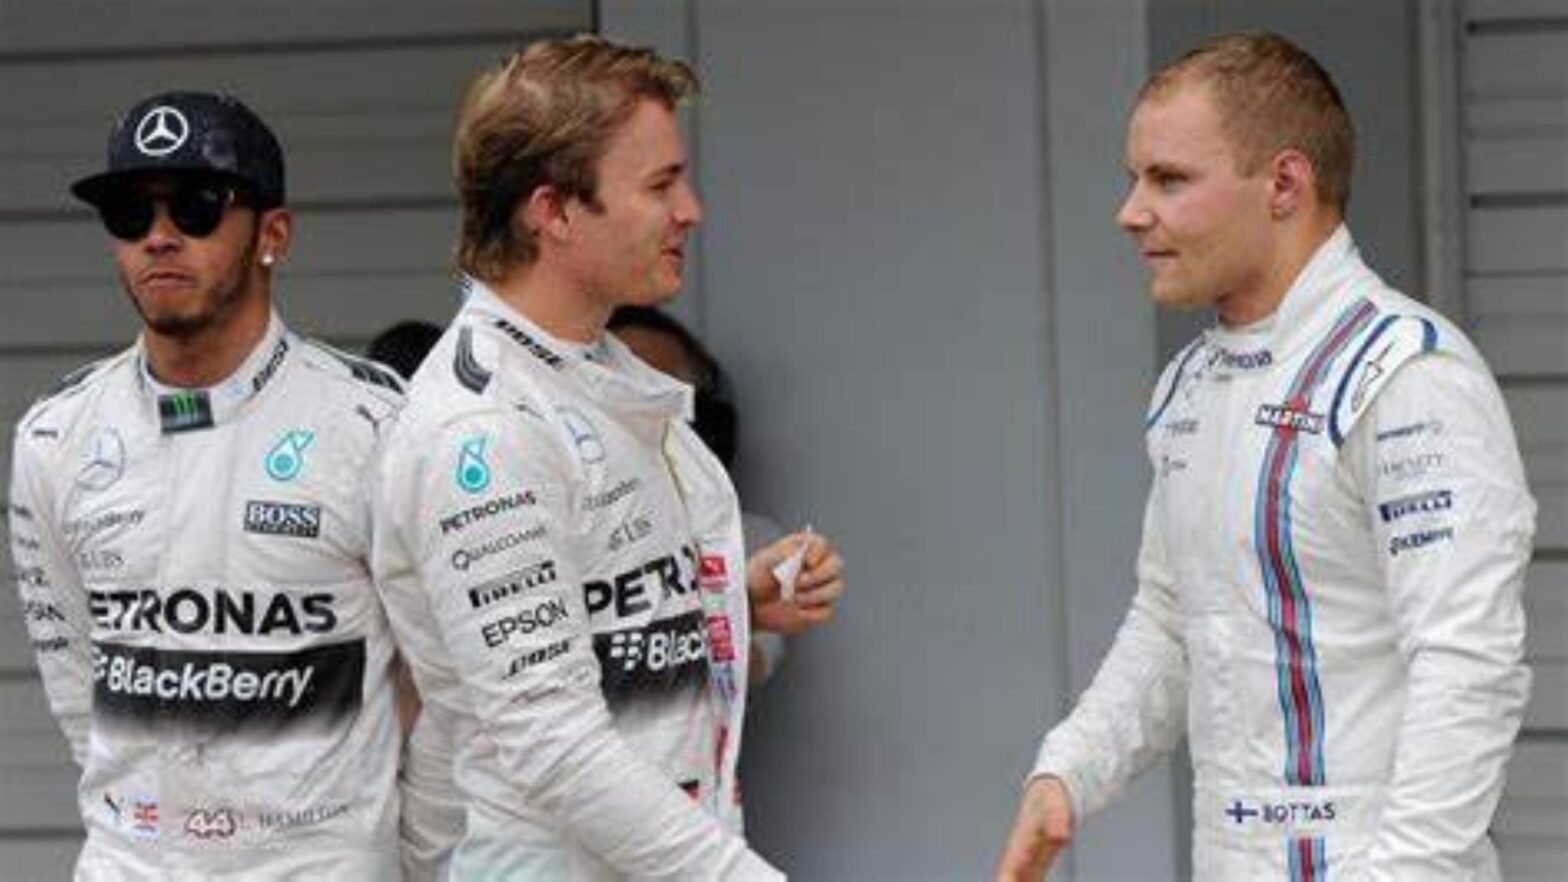 “It’s The Hamilton Chassis”: Nico Rosberg Reveals His Opinion On Valtteri Bottas Impressive Performance in Practice Session